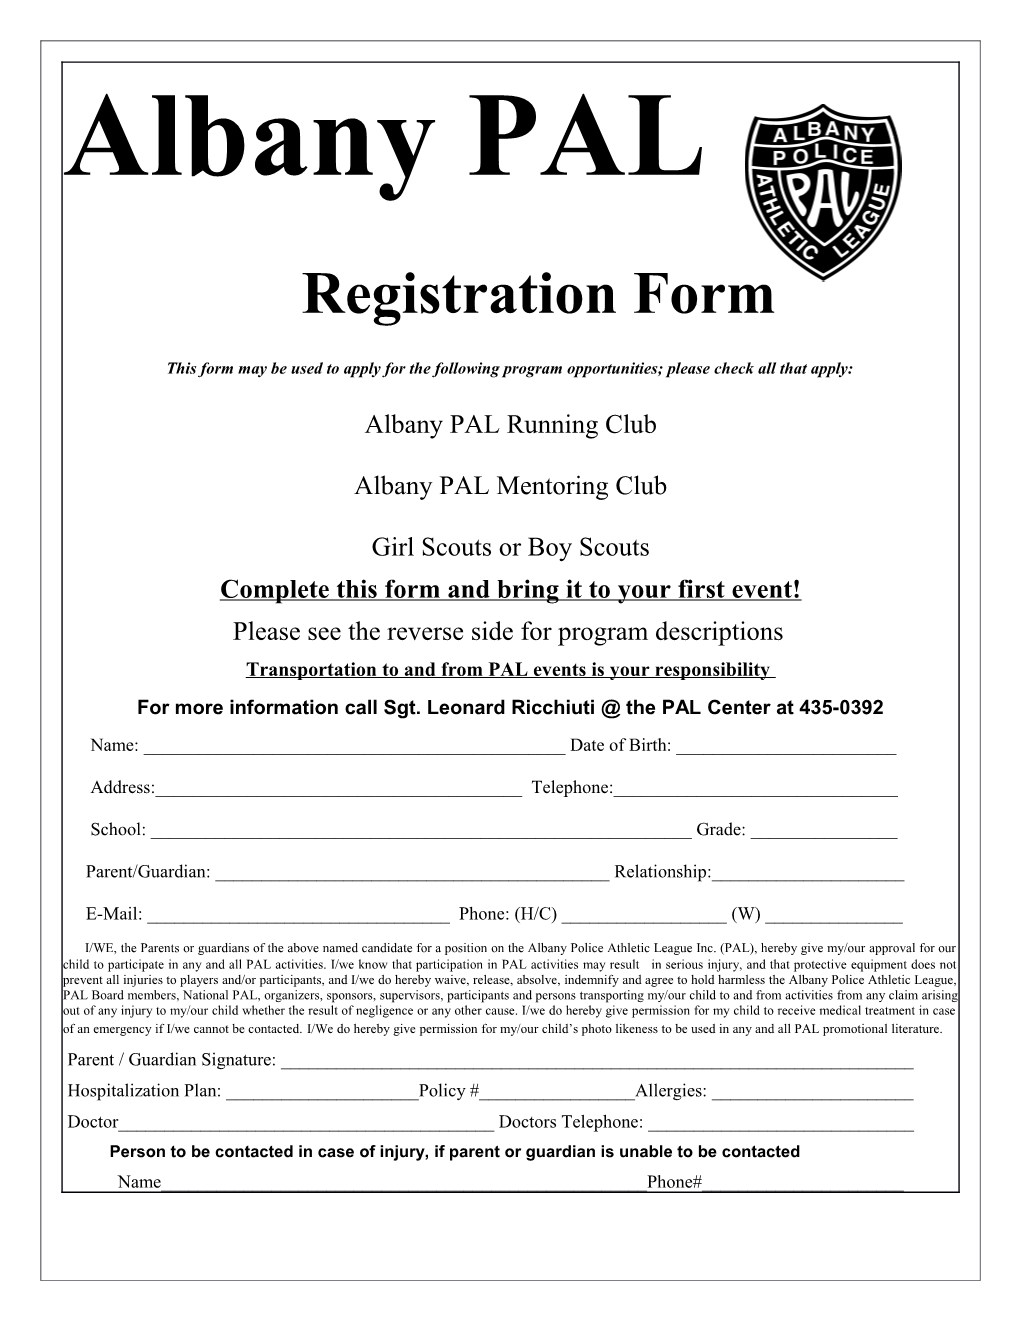 Complete This Form and Bring It to Your First Event!